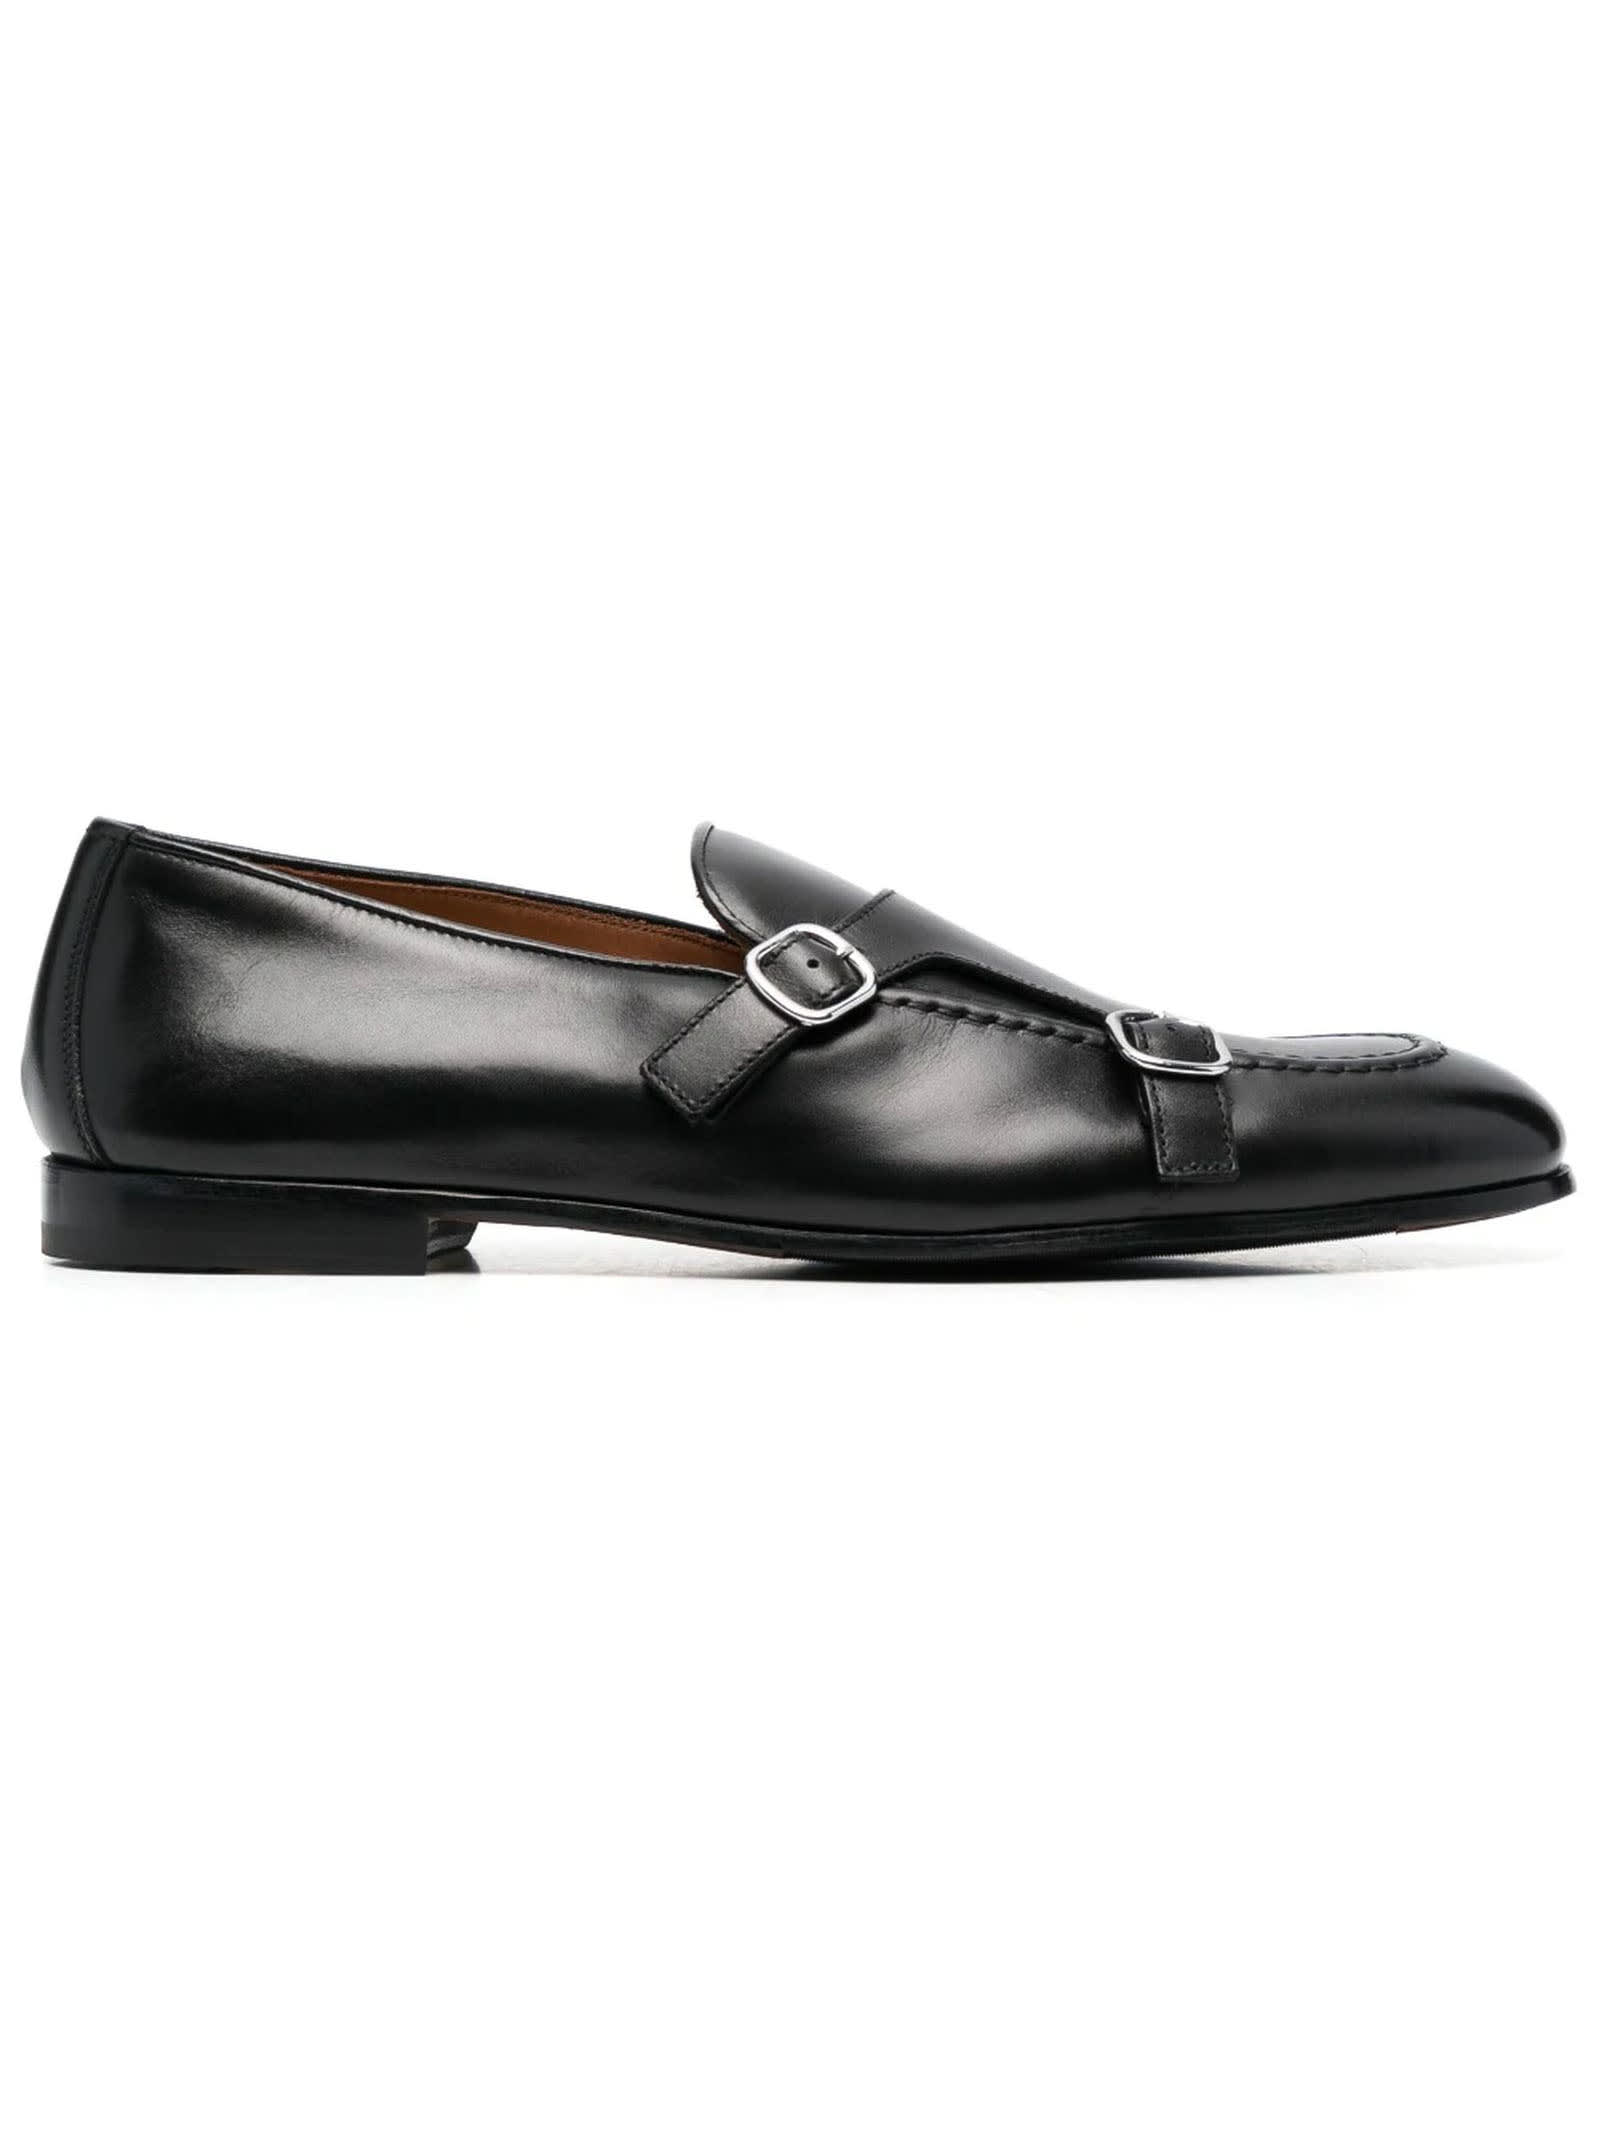 DOUCAL'S BLACK CALF LEATHER MONK SHOES